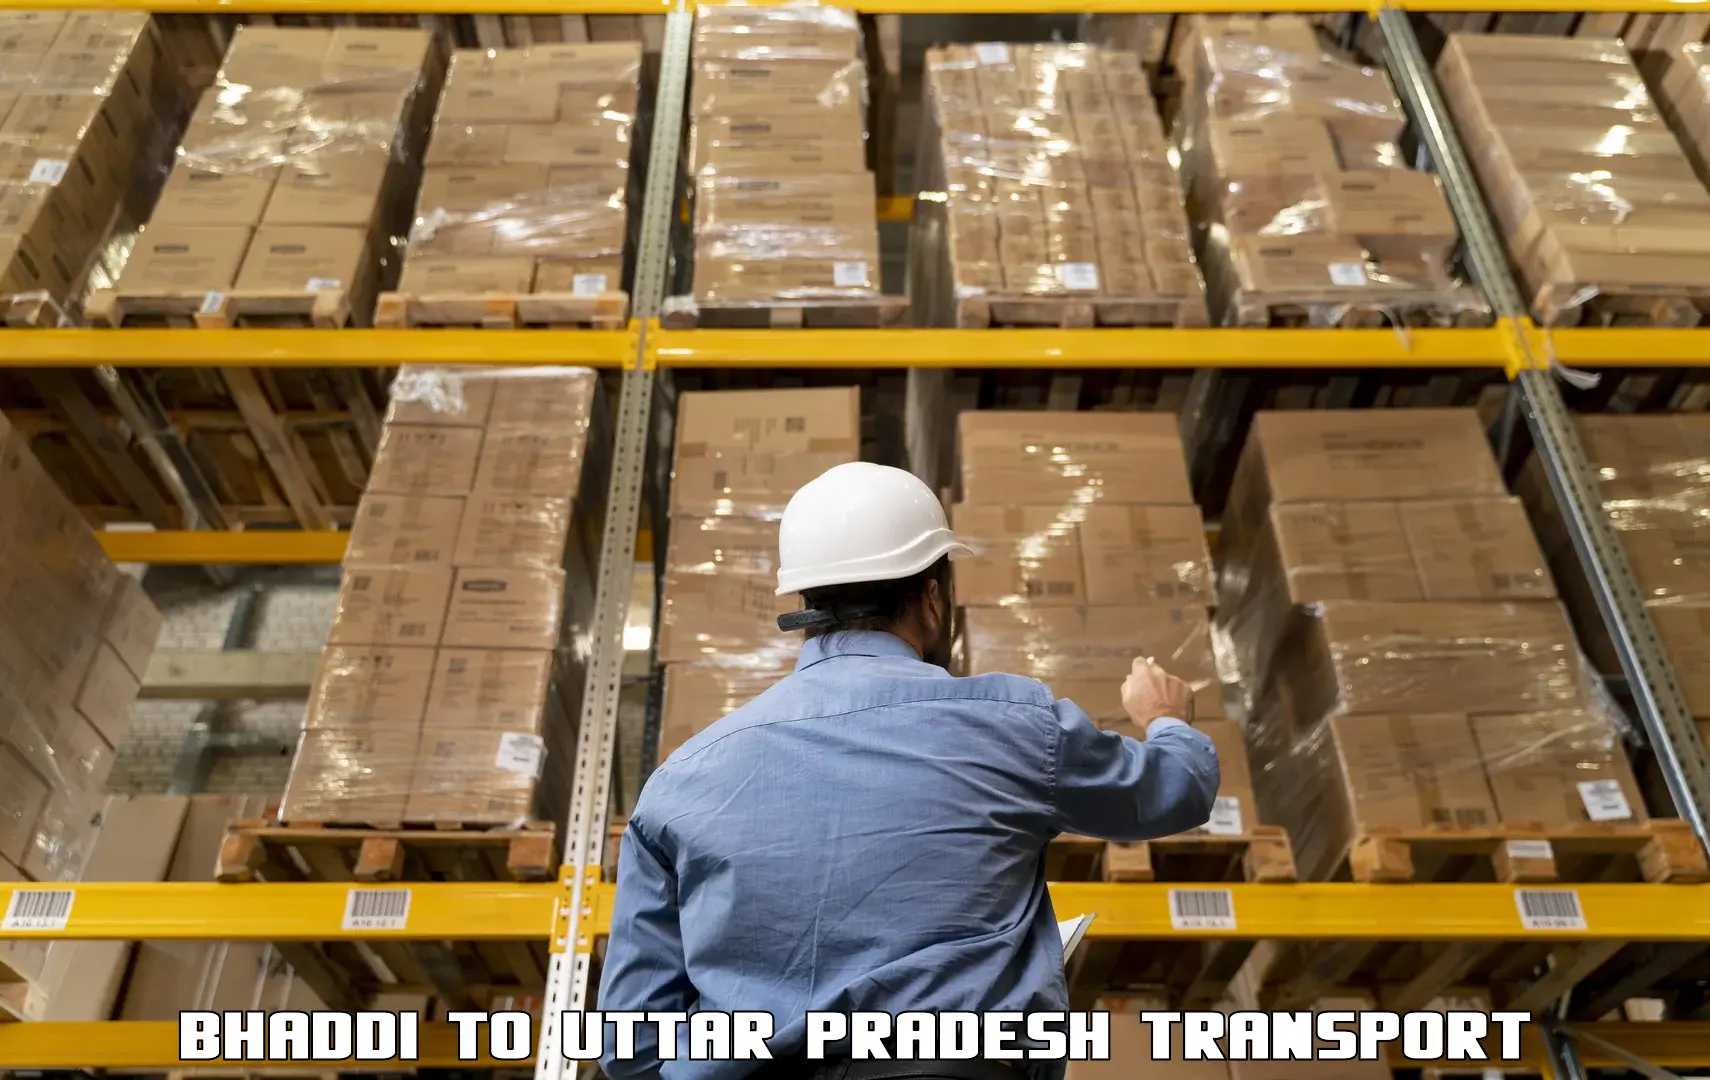 Material transport services Bhaddi to Hathras